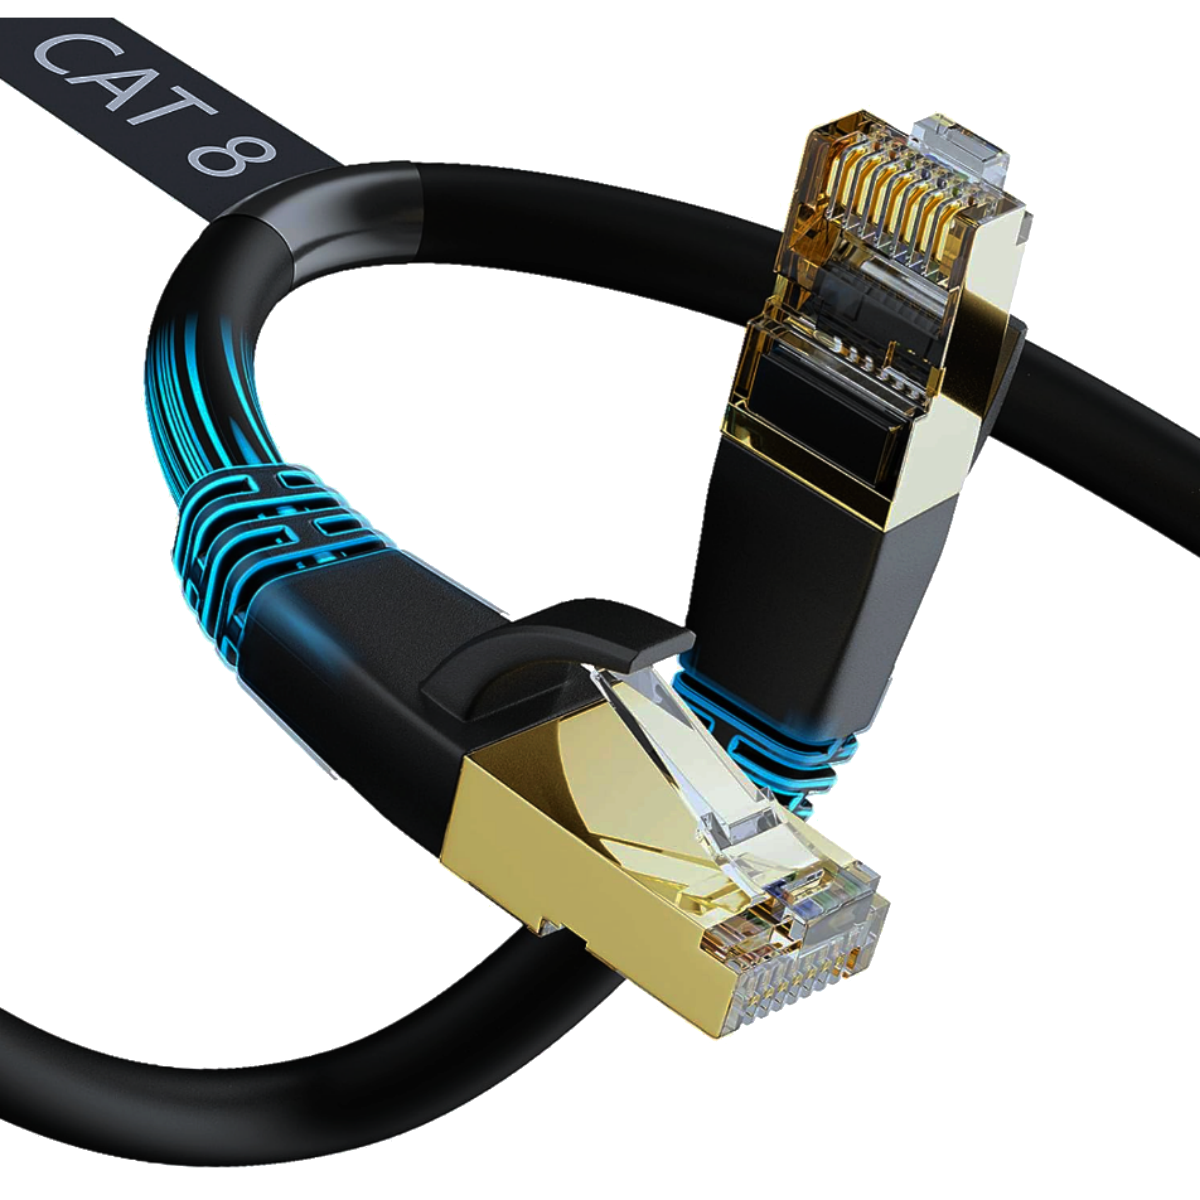 Cat 8 Ethernet Cable 3ft - High Speed Cat8 Internet WiFi Cable 40 Gbps 2000  Mhz - RJ45 Connector with Gold Plated, Weatherproof LAN Patch Cord Cable  for Router, Gaming, PC - Black - 3 feet 